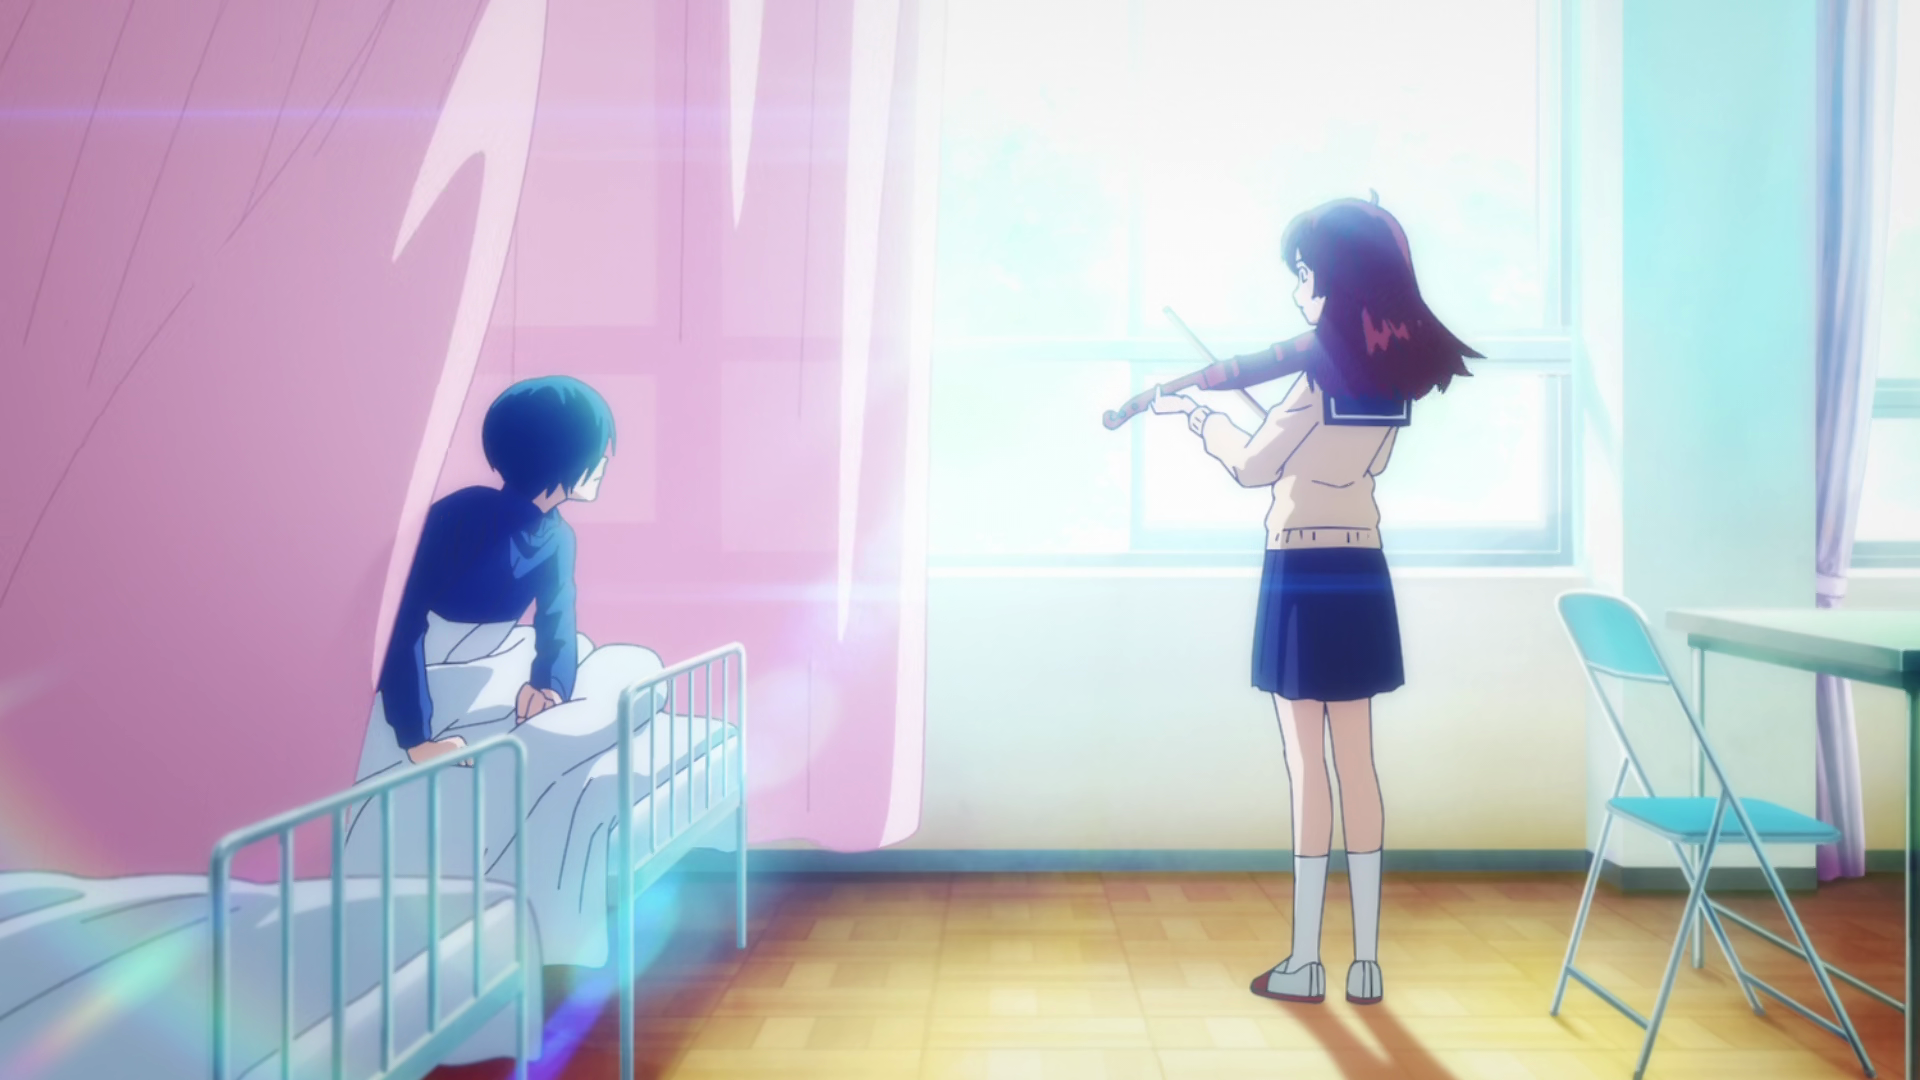 Anime Review: Ao-Chan Can't Study Episode 1 - Sequential Planet